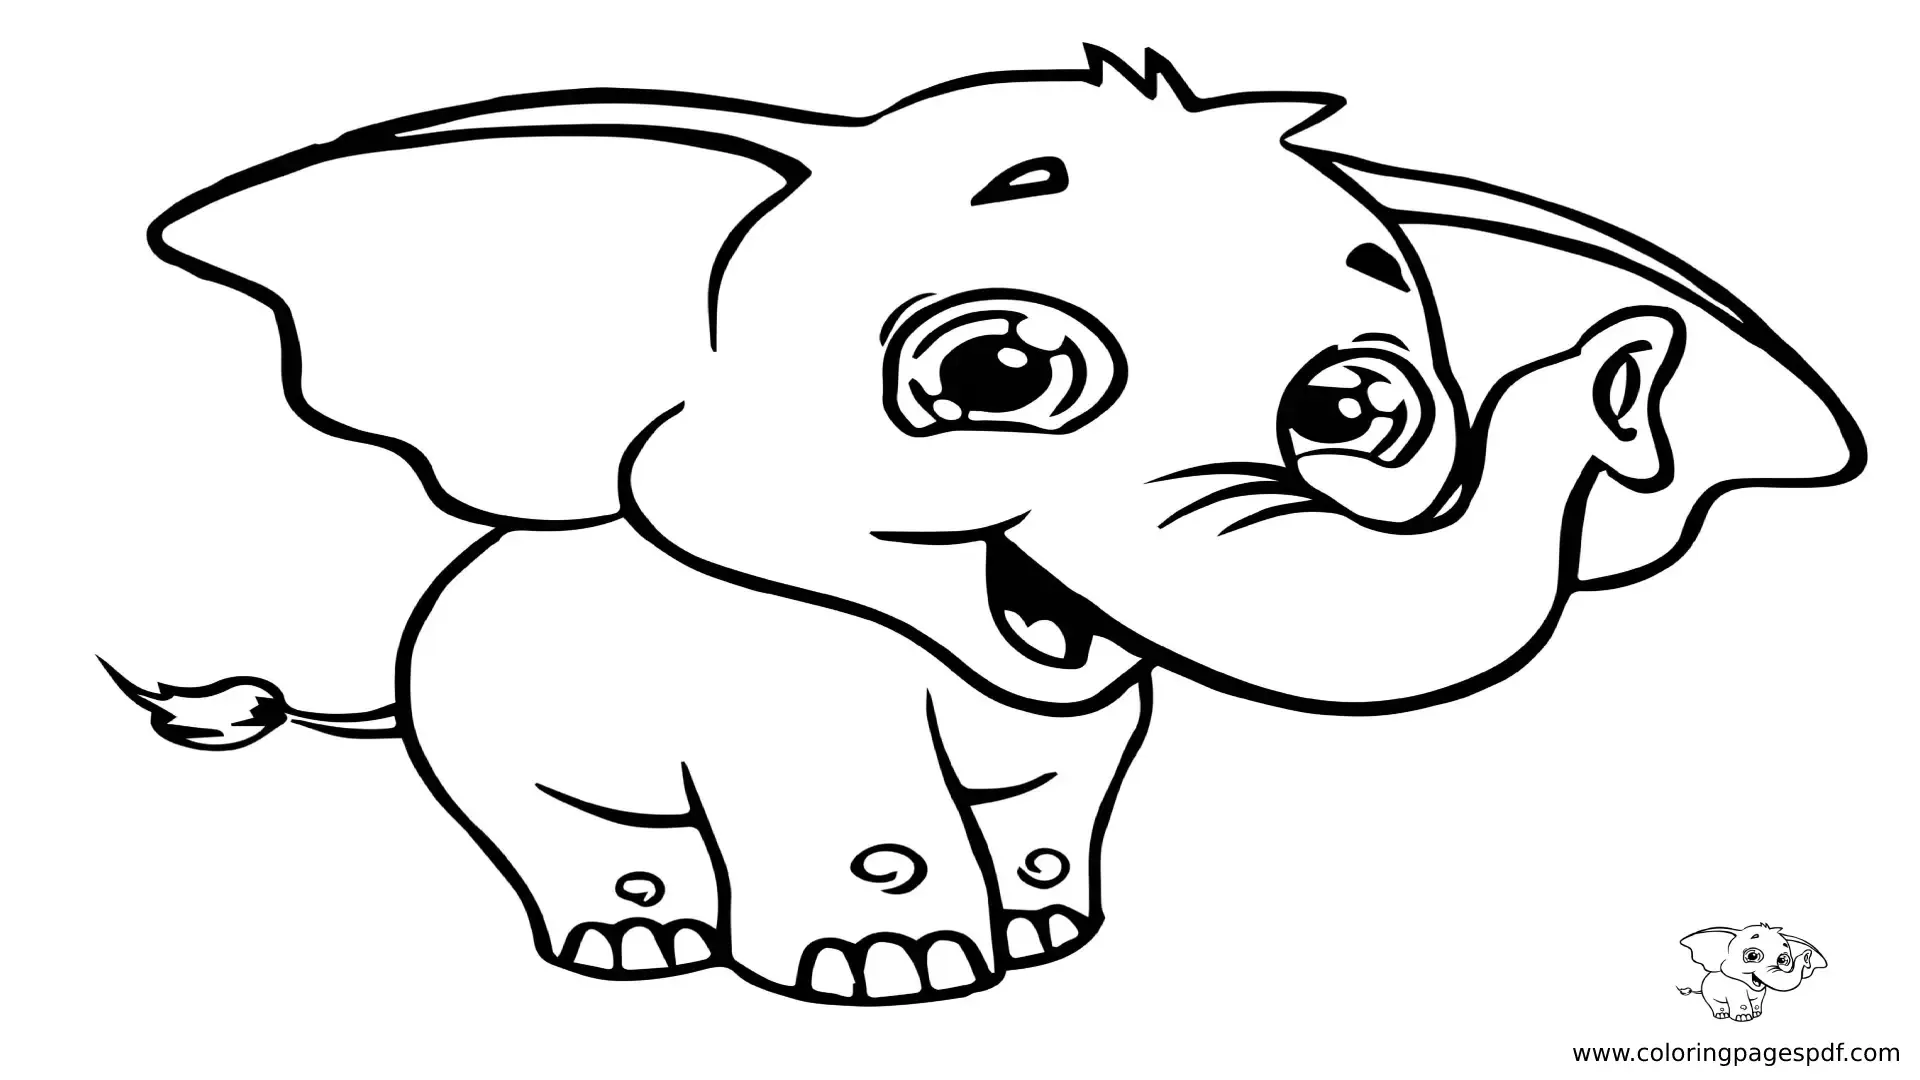 Coloring Pages Of A Small Cute Elephant Smiling